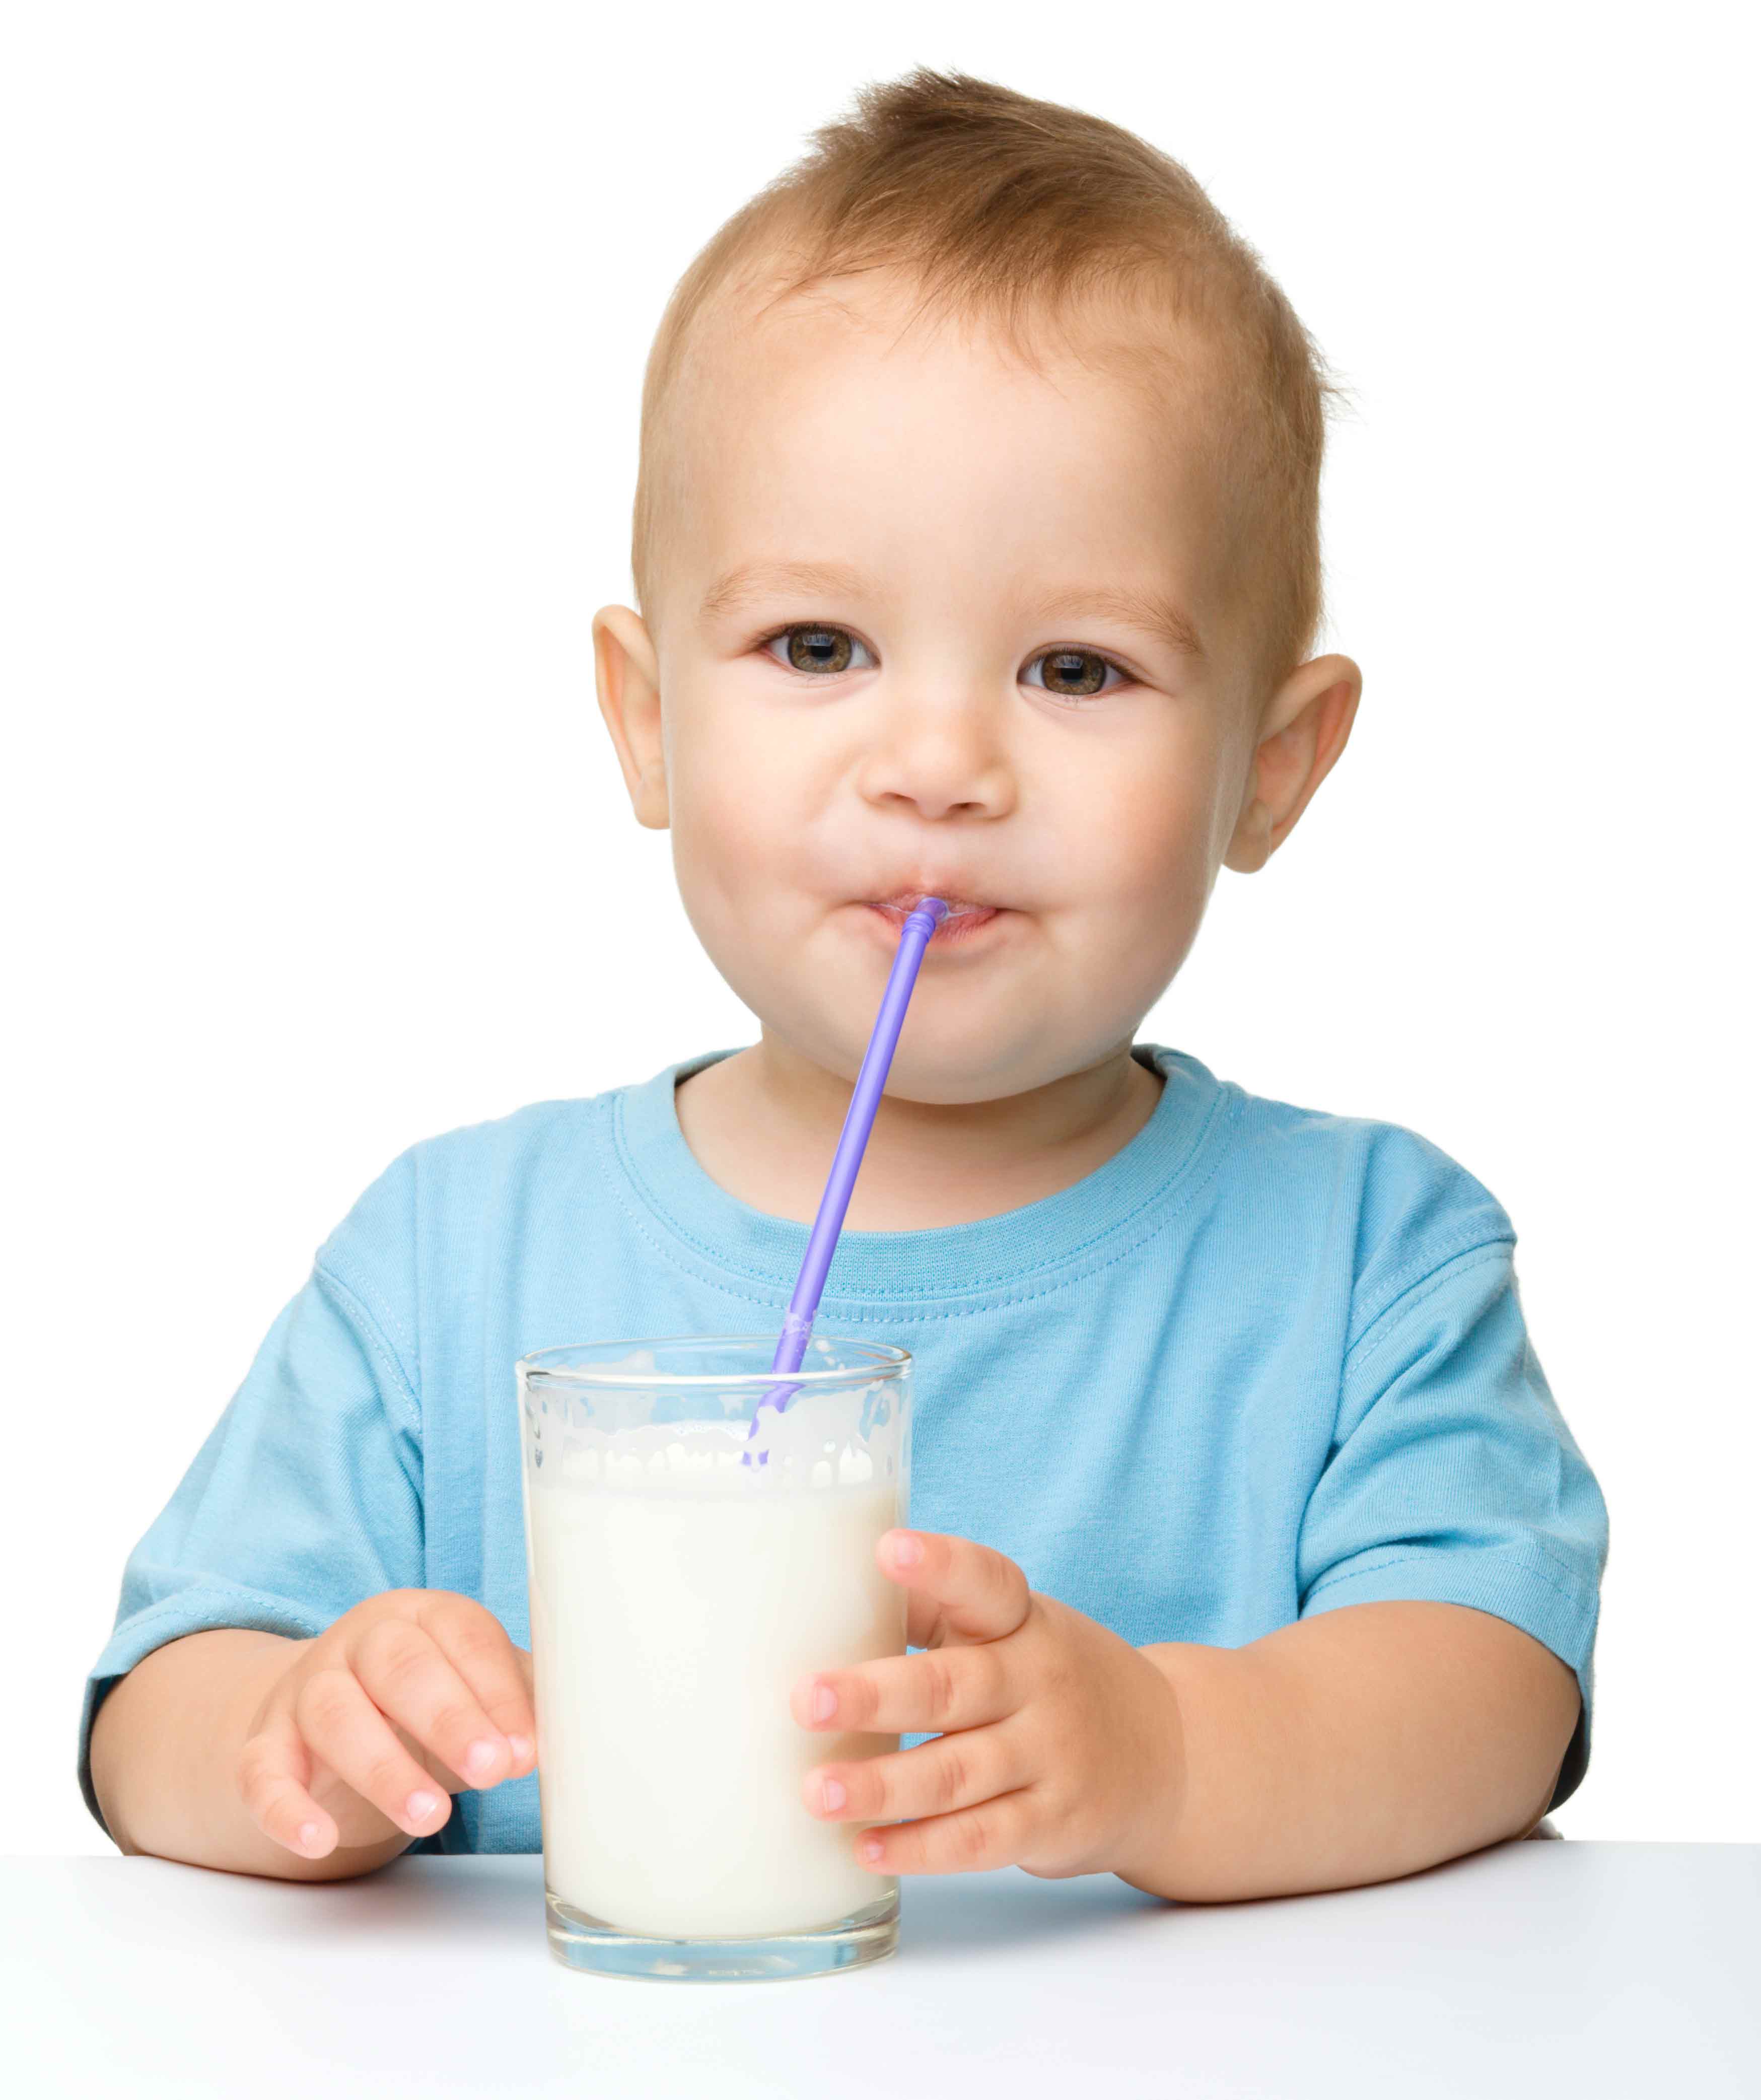 Help! I Can’t Get My Kid To Drink Milk